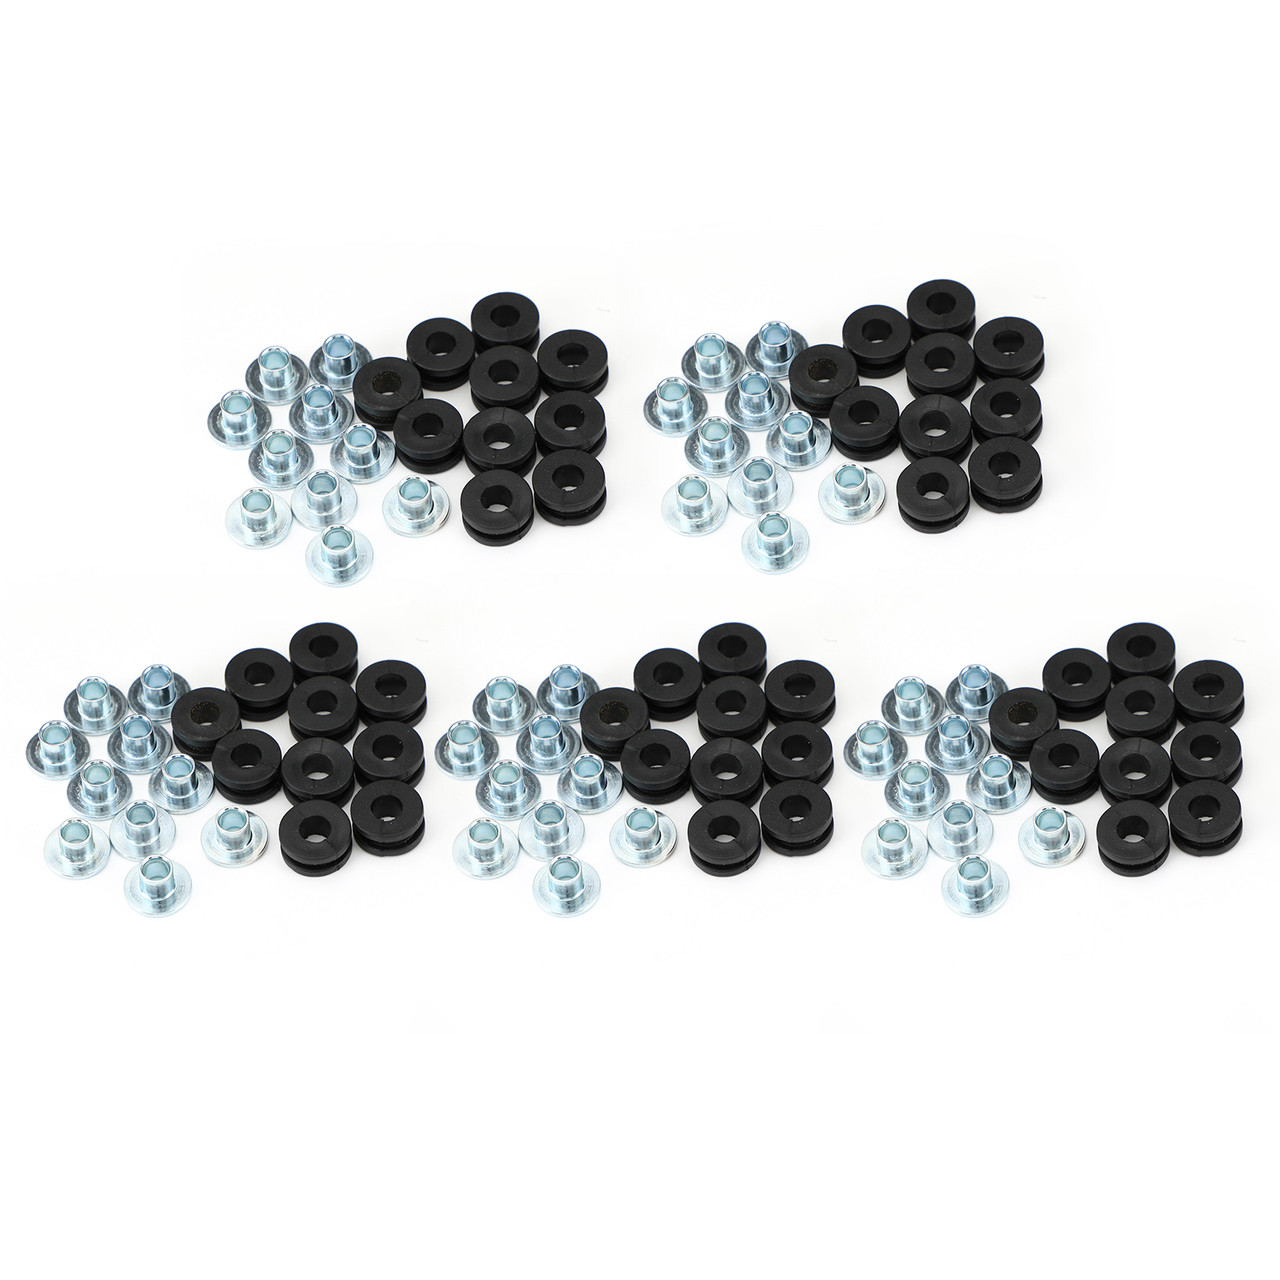 50 Pack M6 Motorcycle Side Panel Rubbers / Grommets Motorbike Kit Fit for Honda